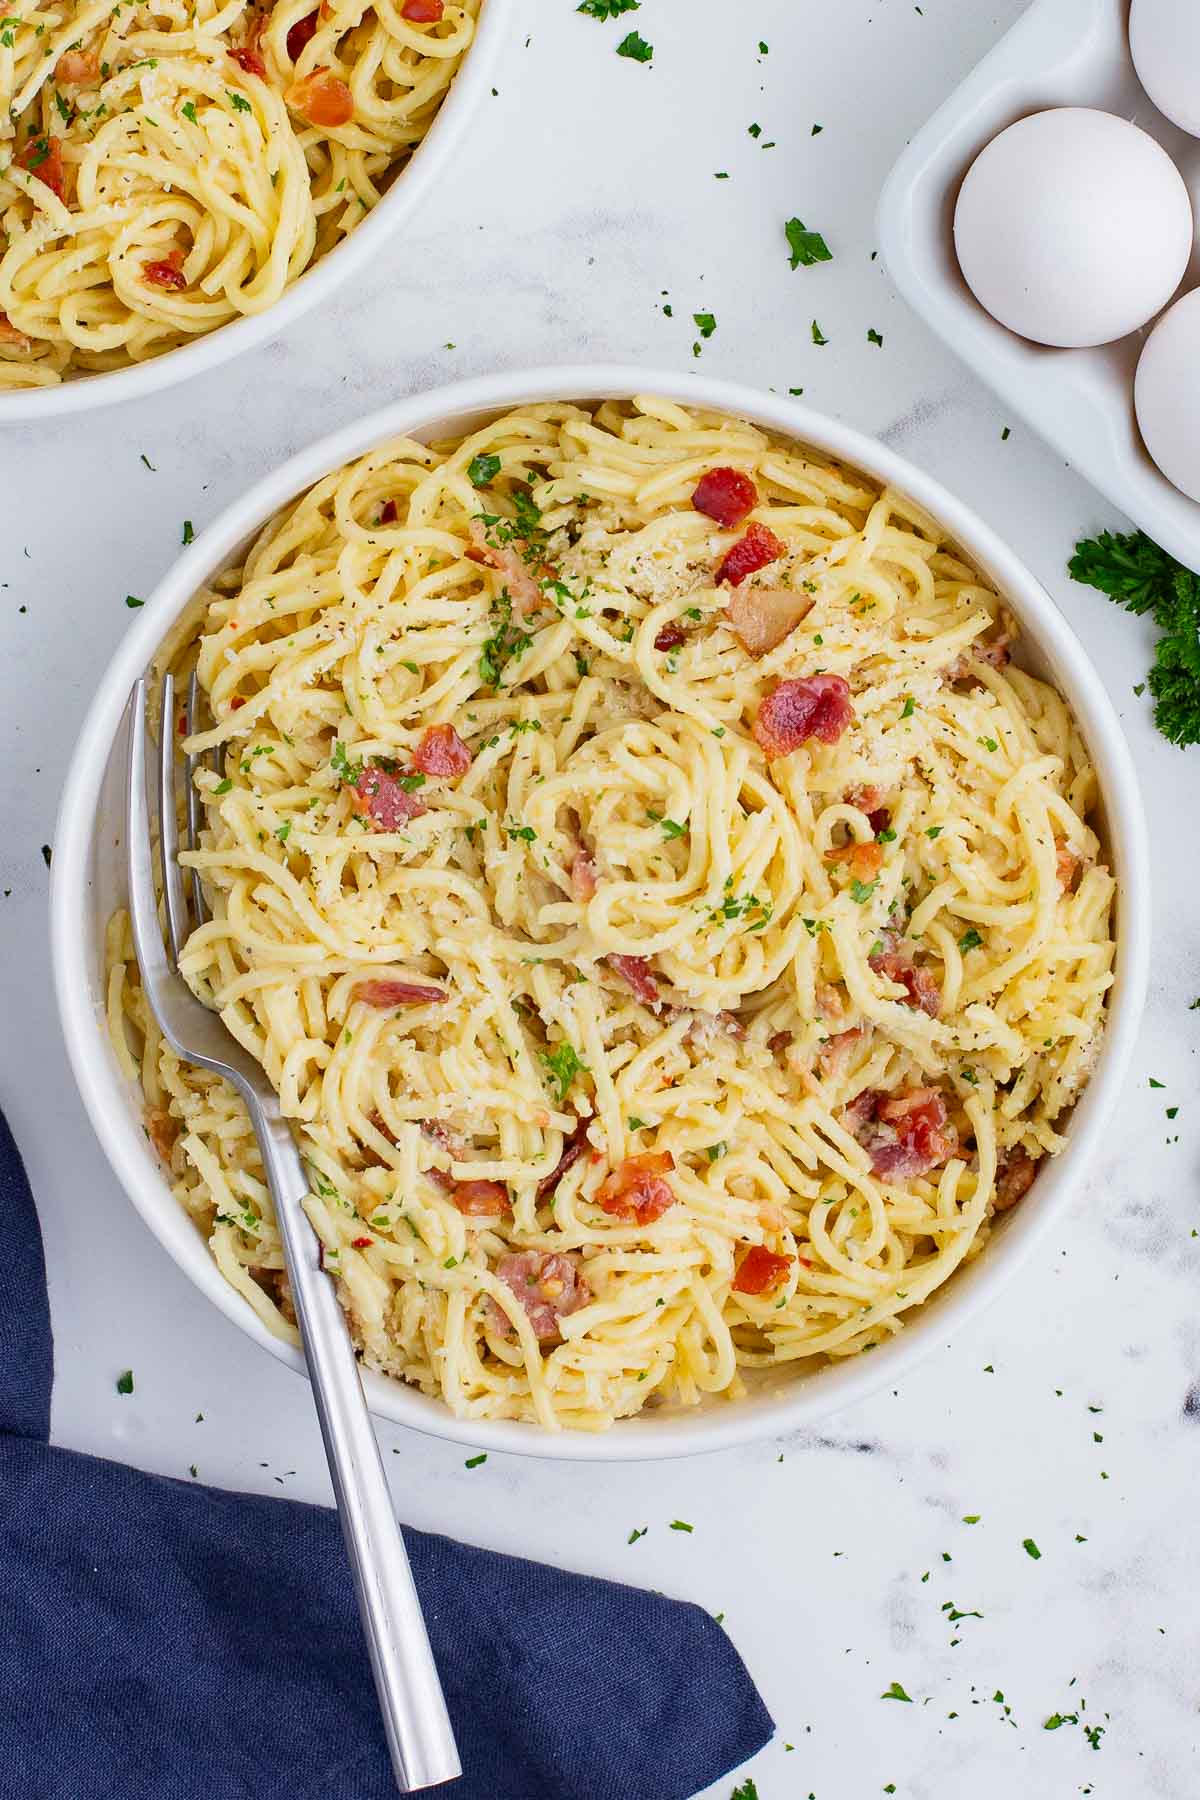 Pasta carbonara is a quick and easy dinner dish full of flavor.